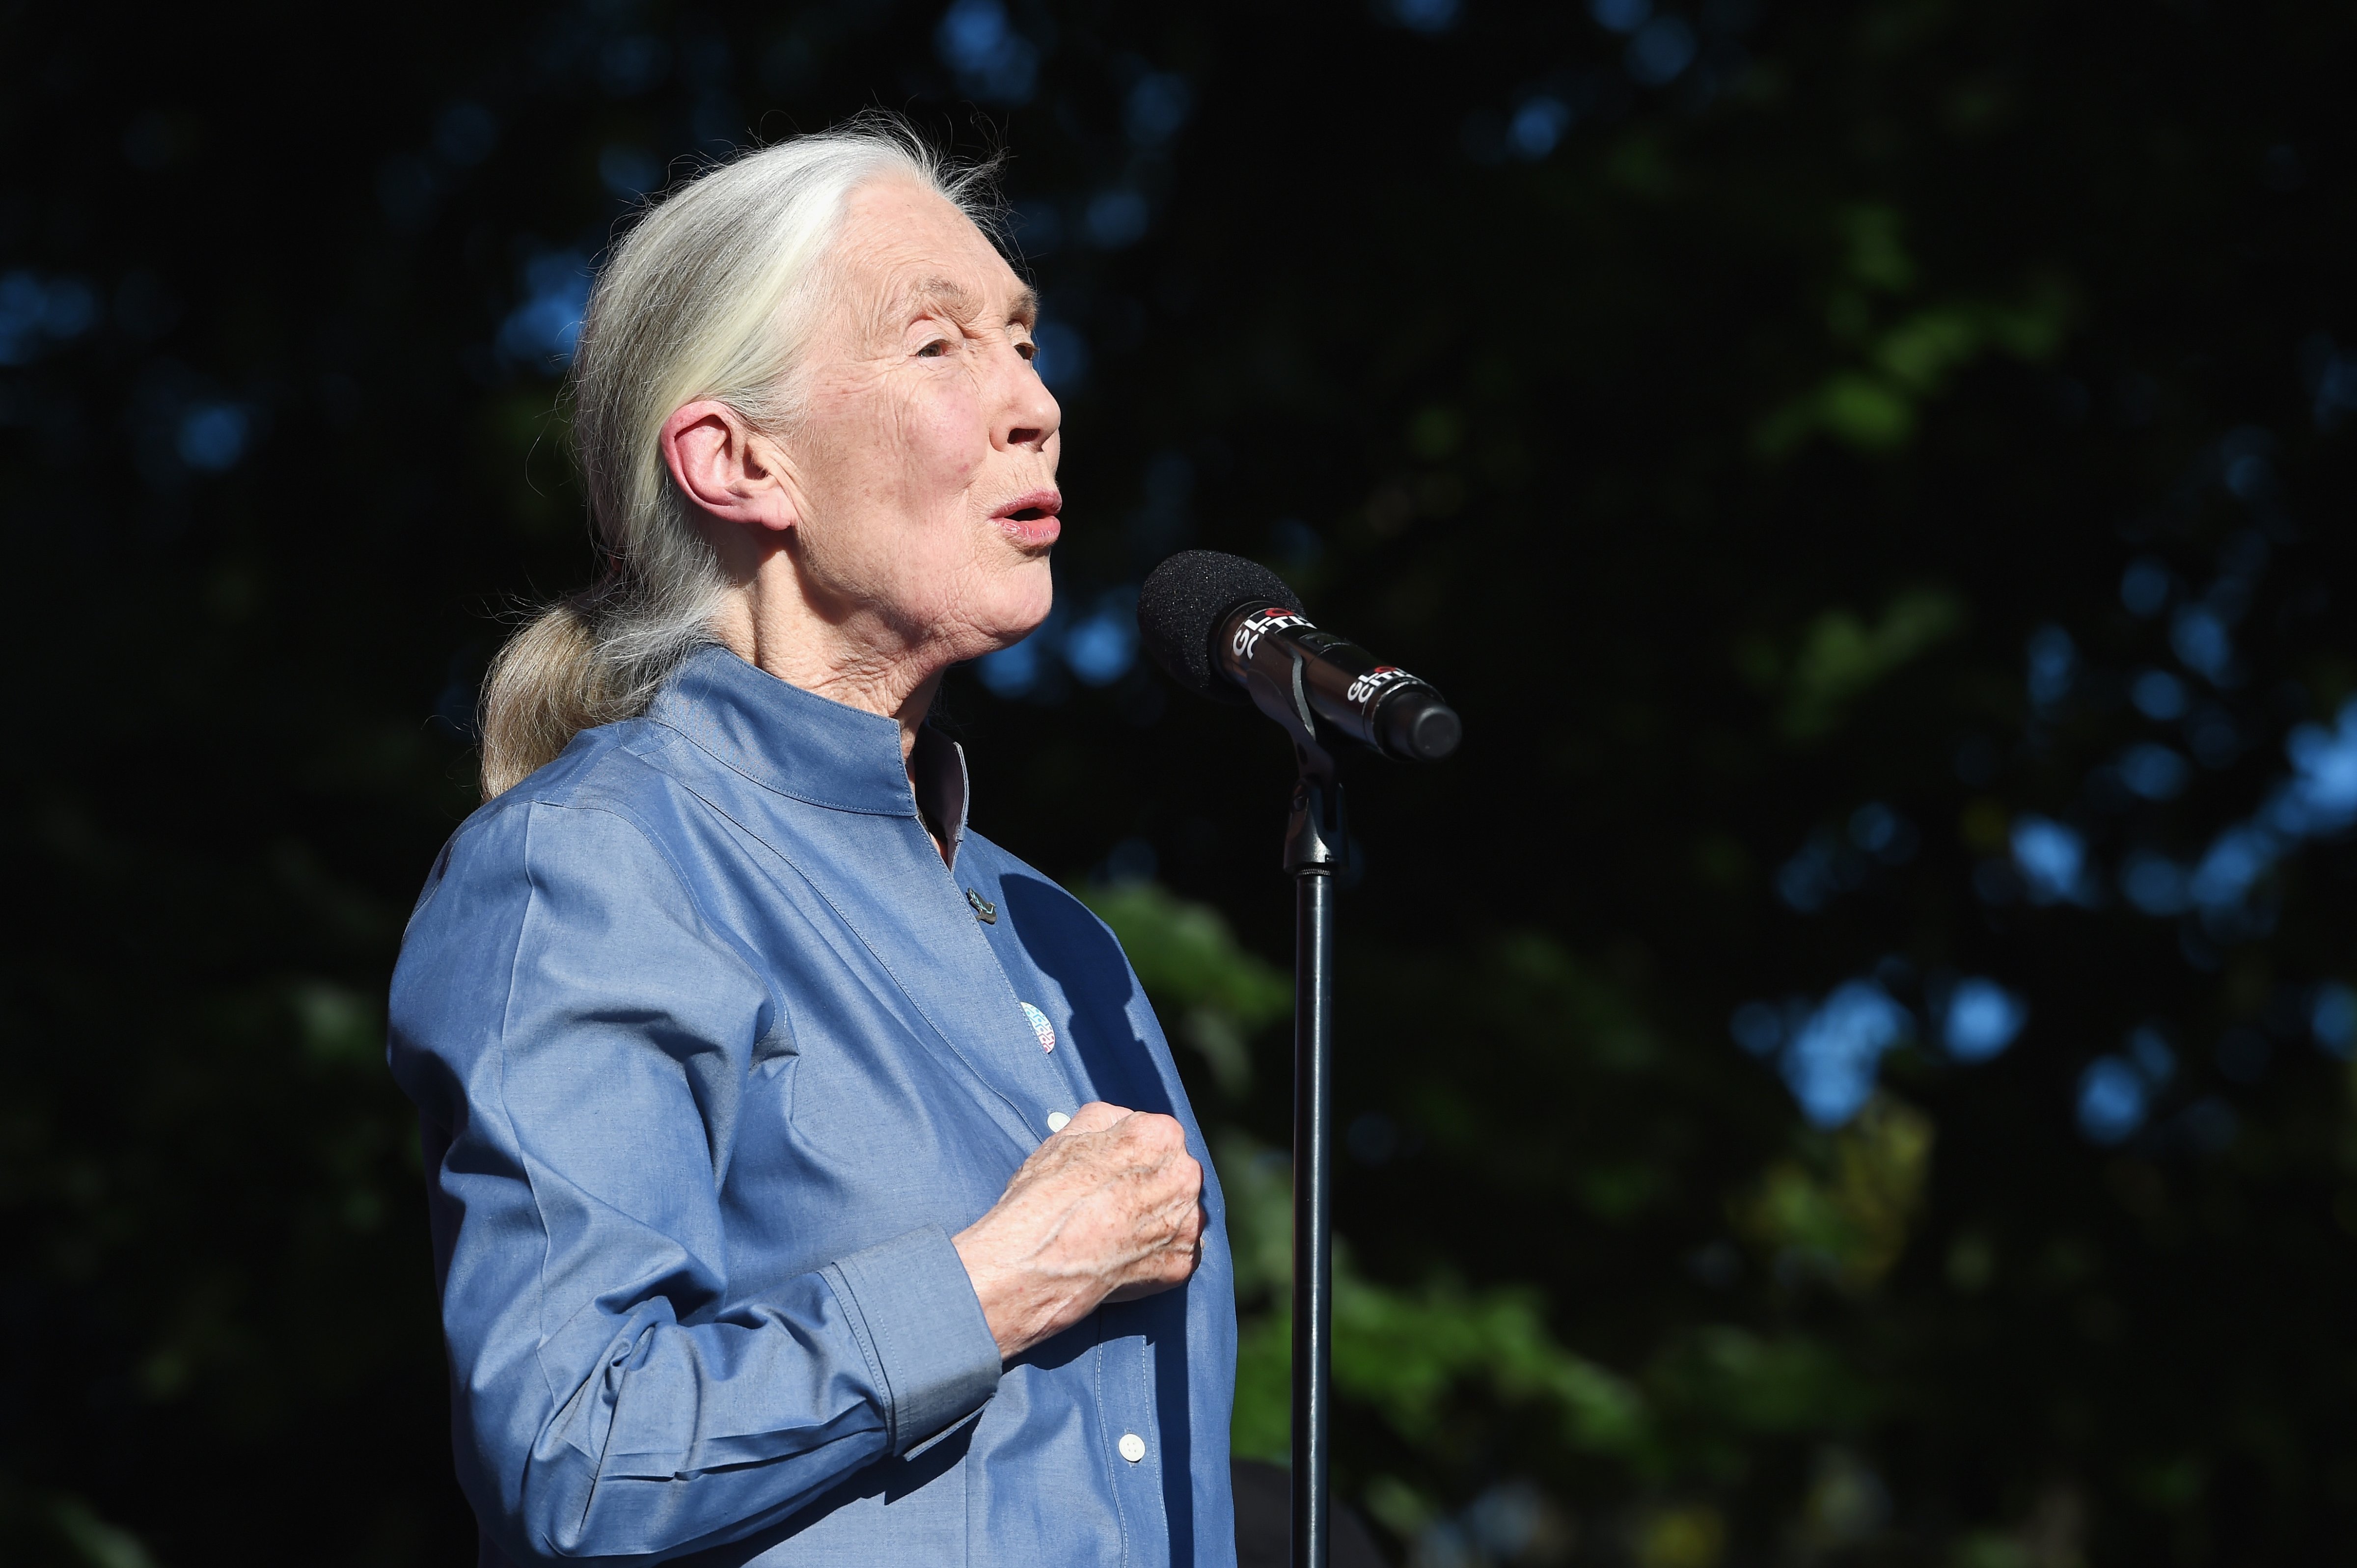 Jane Goodall speaks onstage during Global Citizen Festival 2017 on Sept. 23 in New York City. (Michael Kovac—Getty Images)